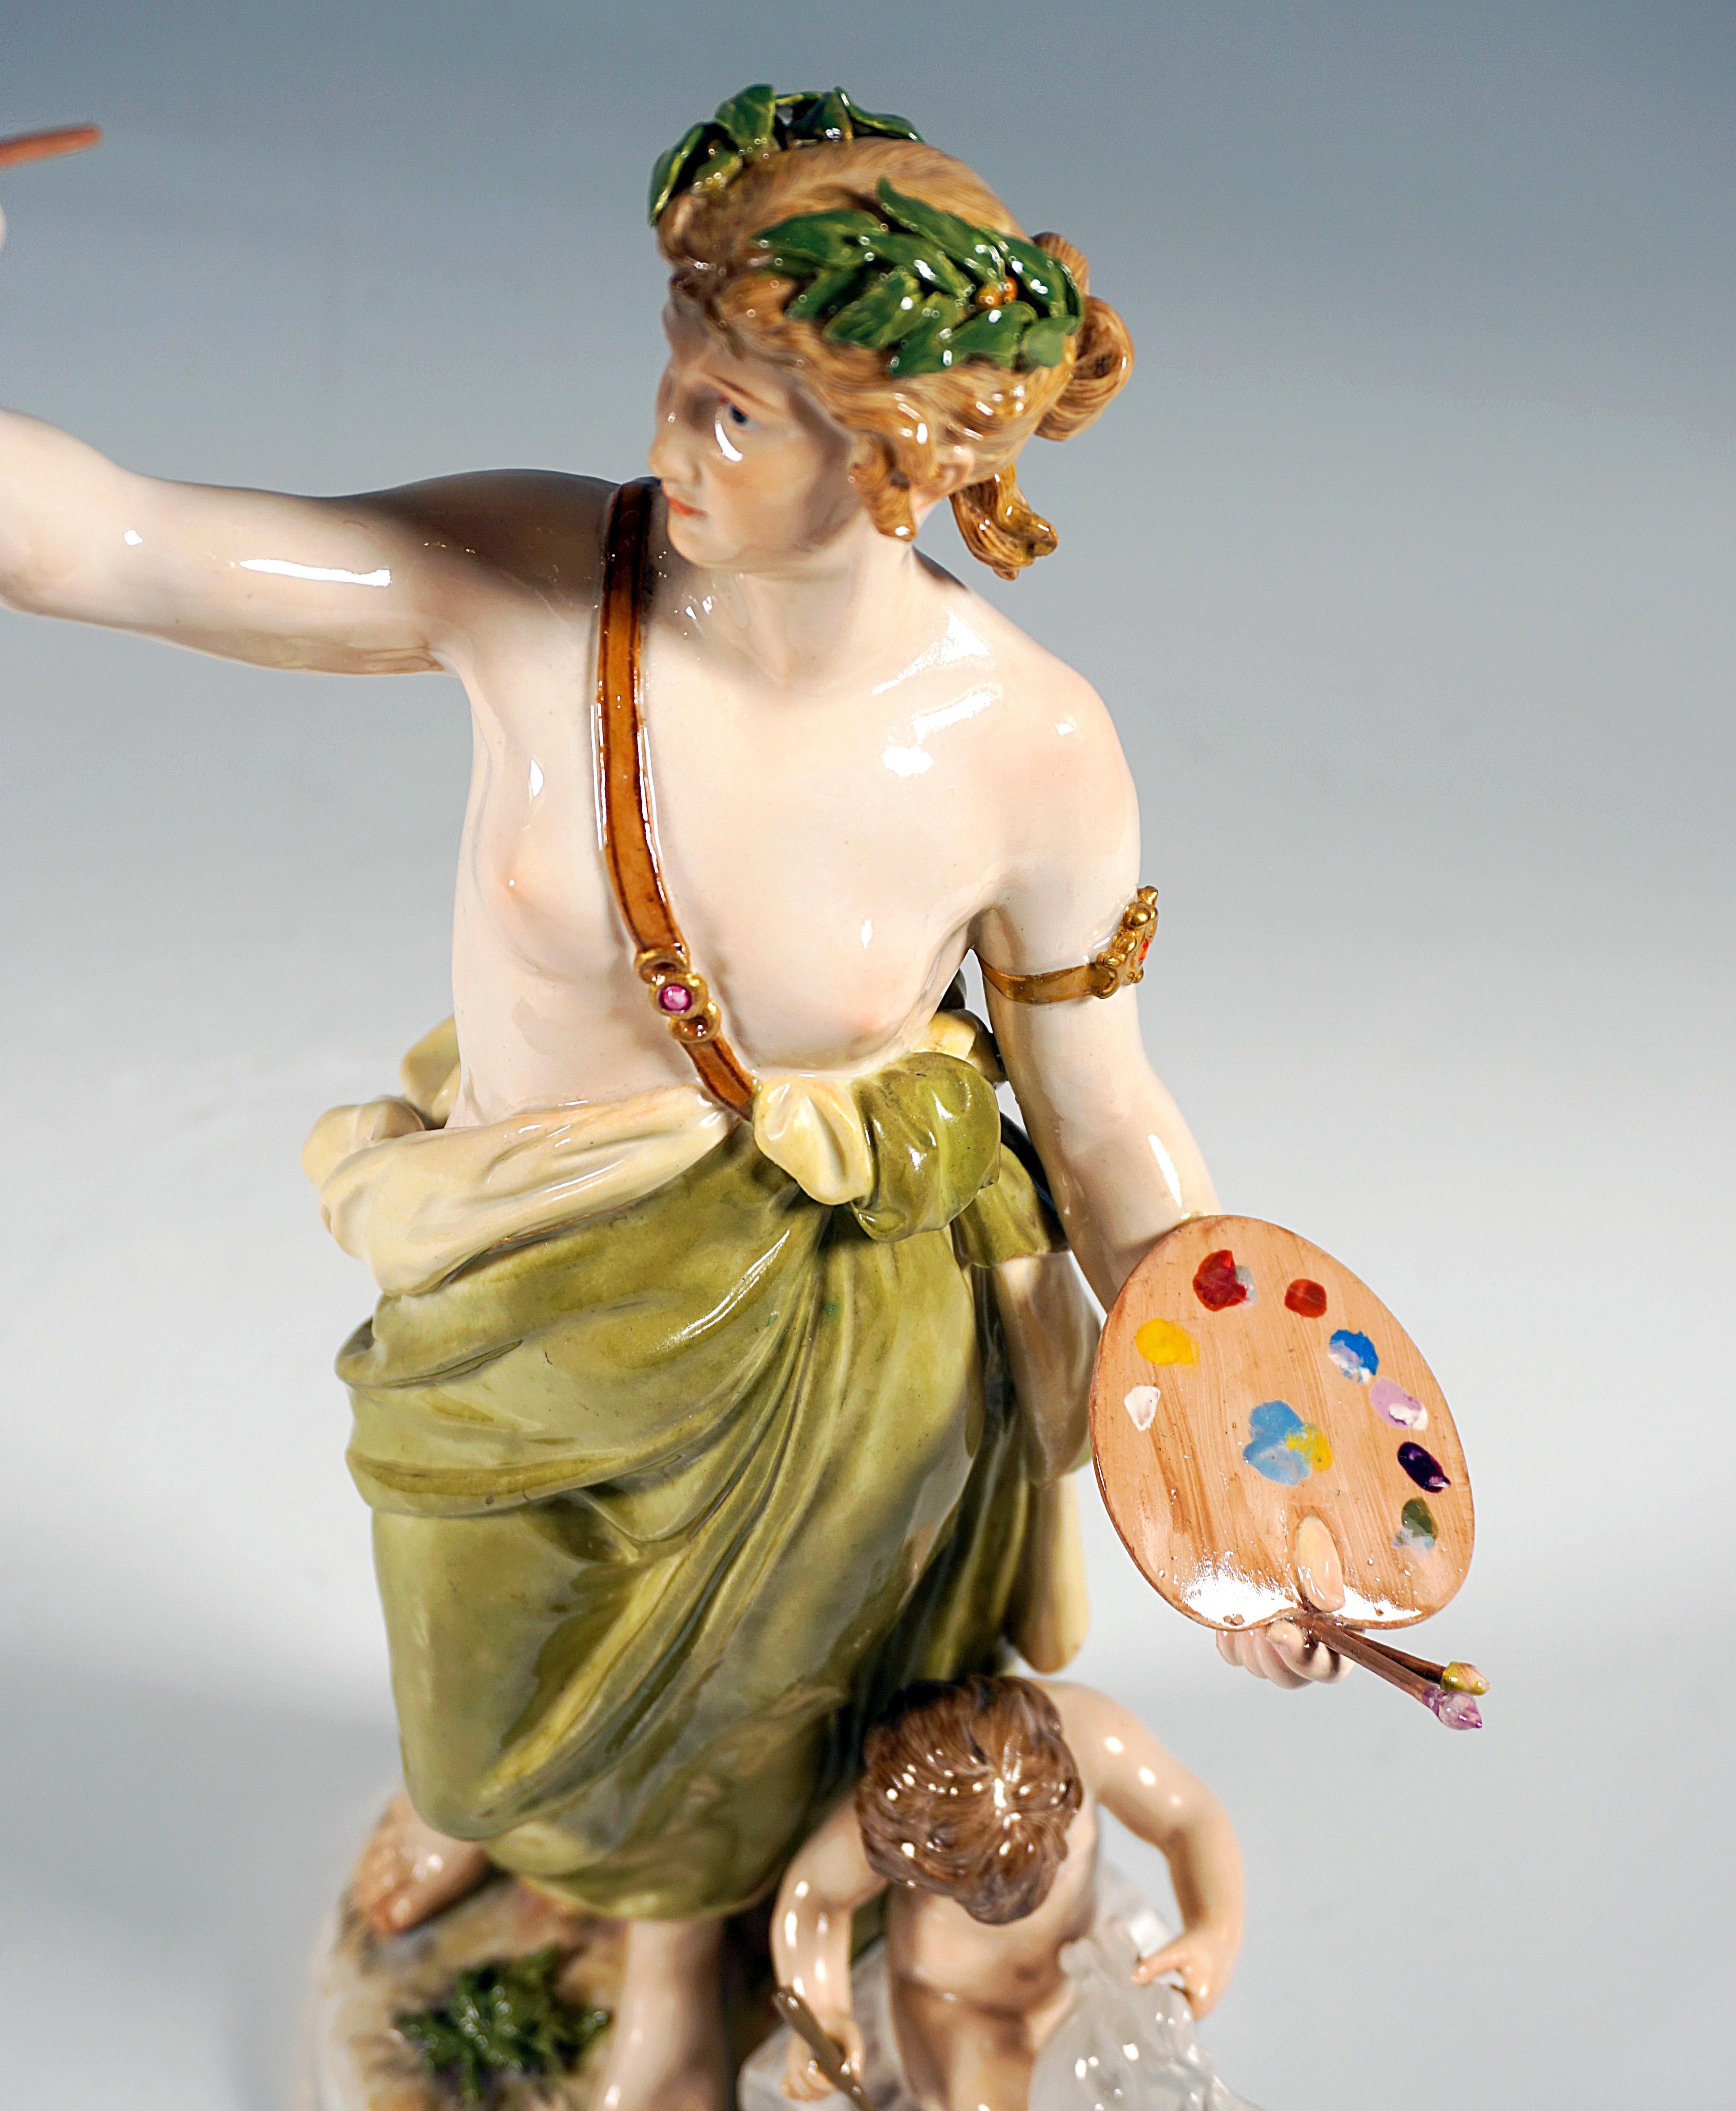 Hand-Crafted Large Meissen Figurine, 'The Painting', by Johann Christian Hirt, Ca 1885